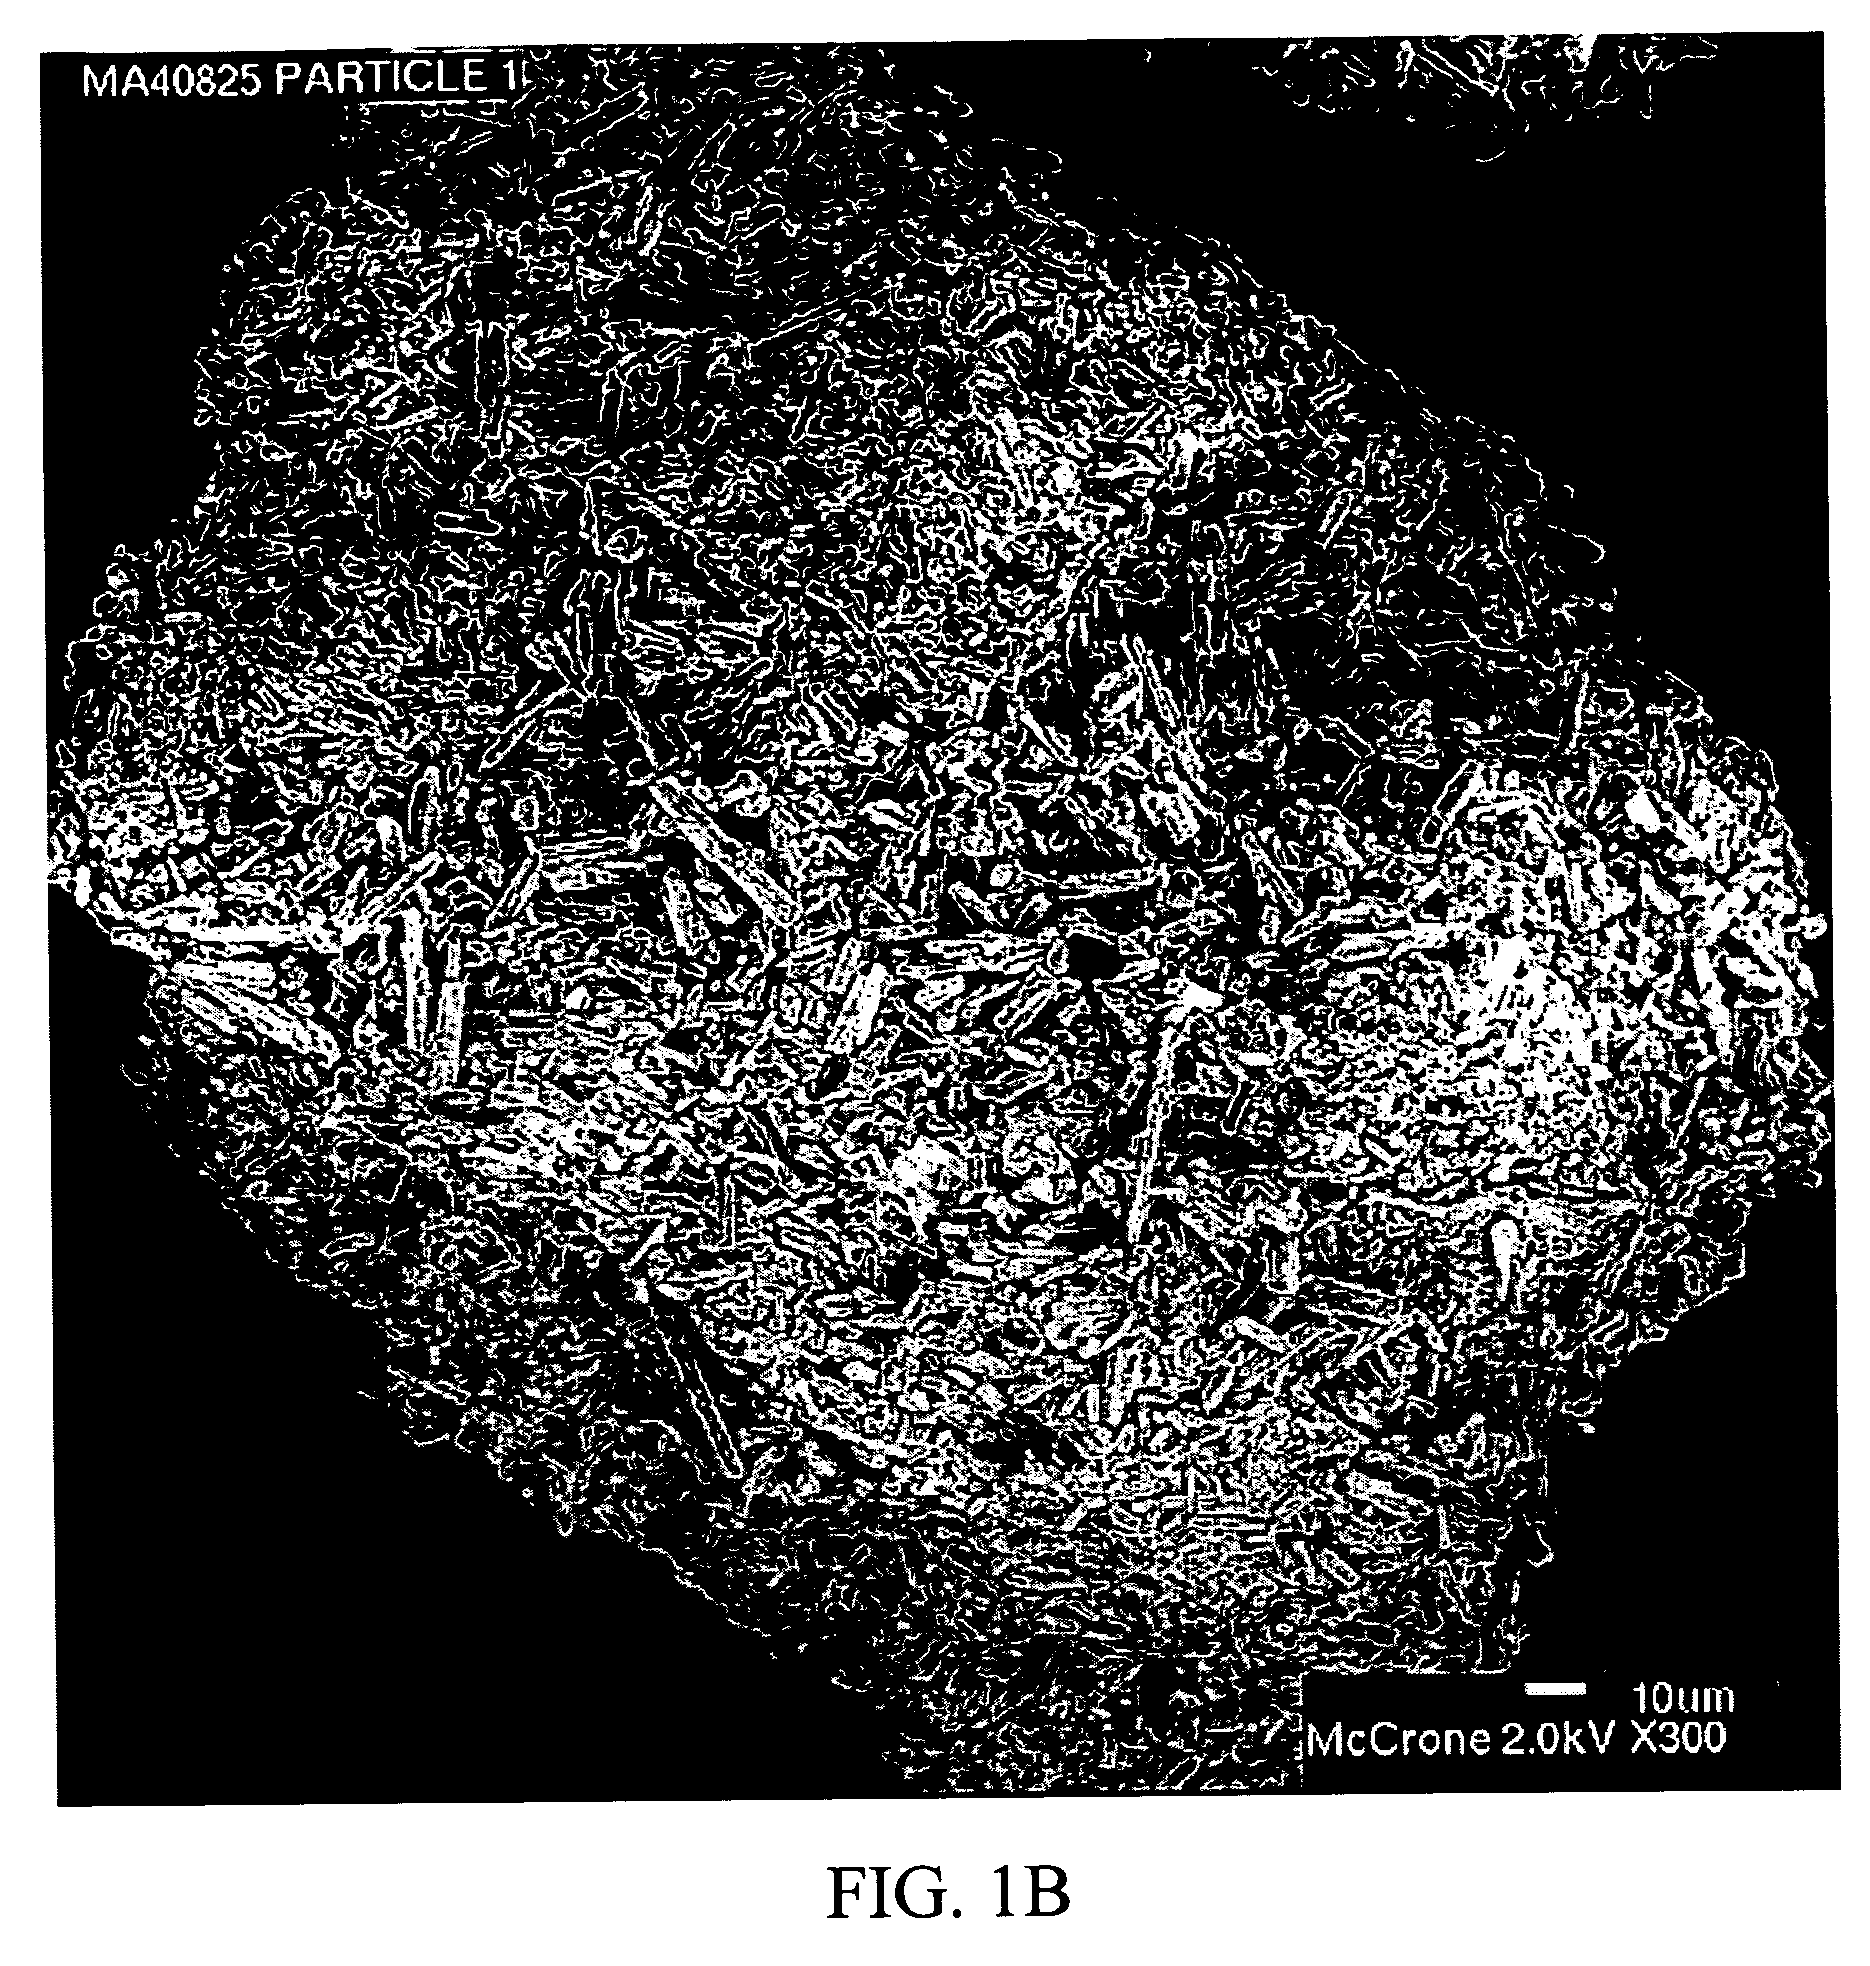 Stabilized individually coated ramipril particles, compositions and methods